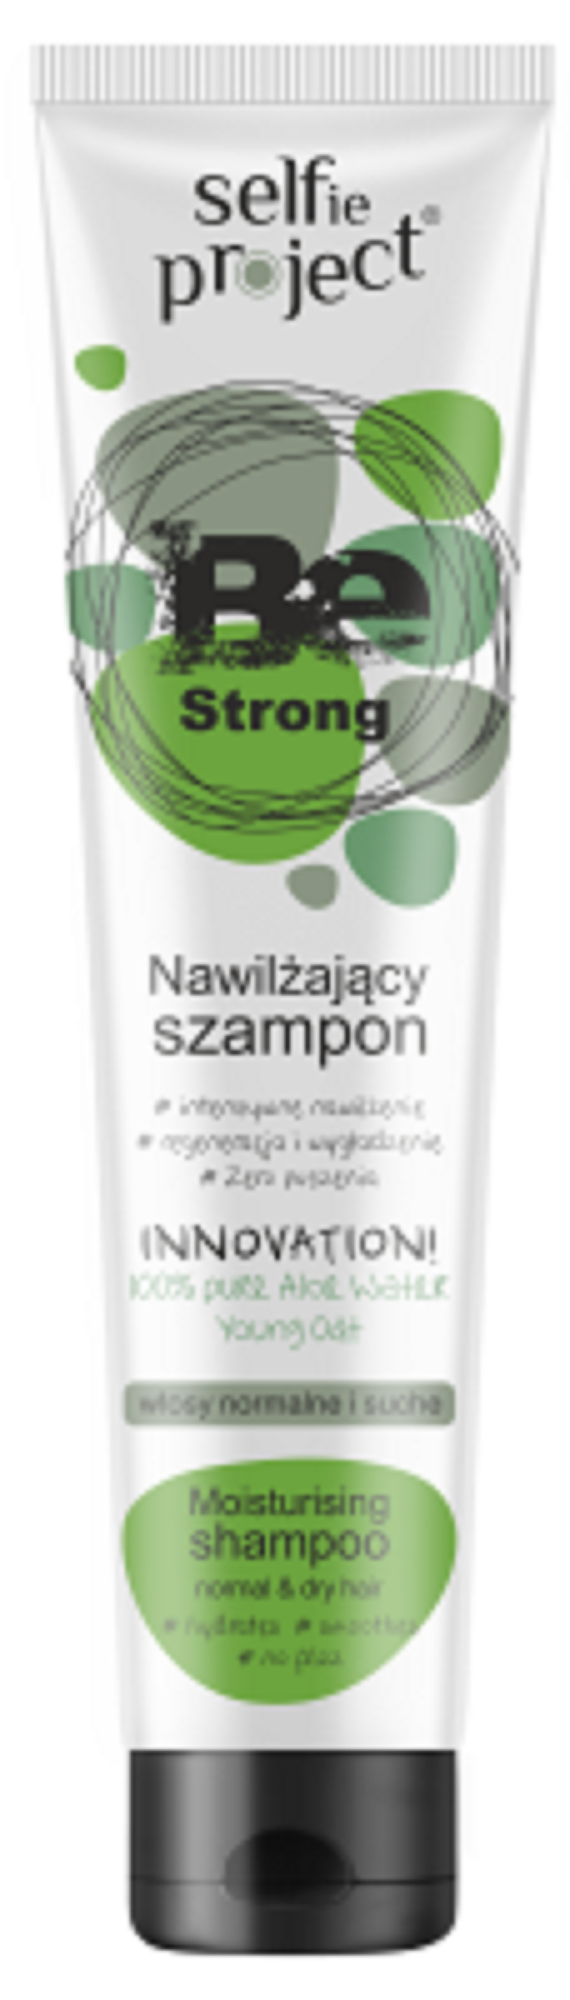 szampon selfie-project young hair